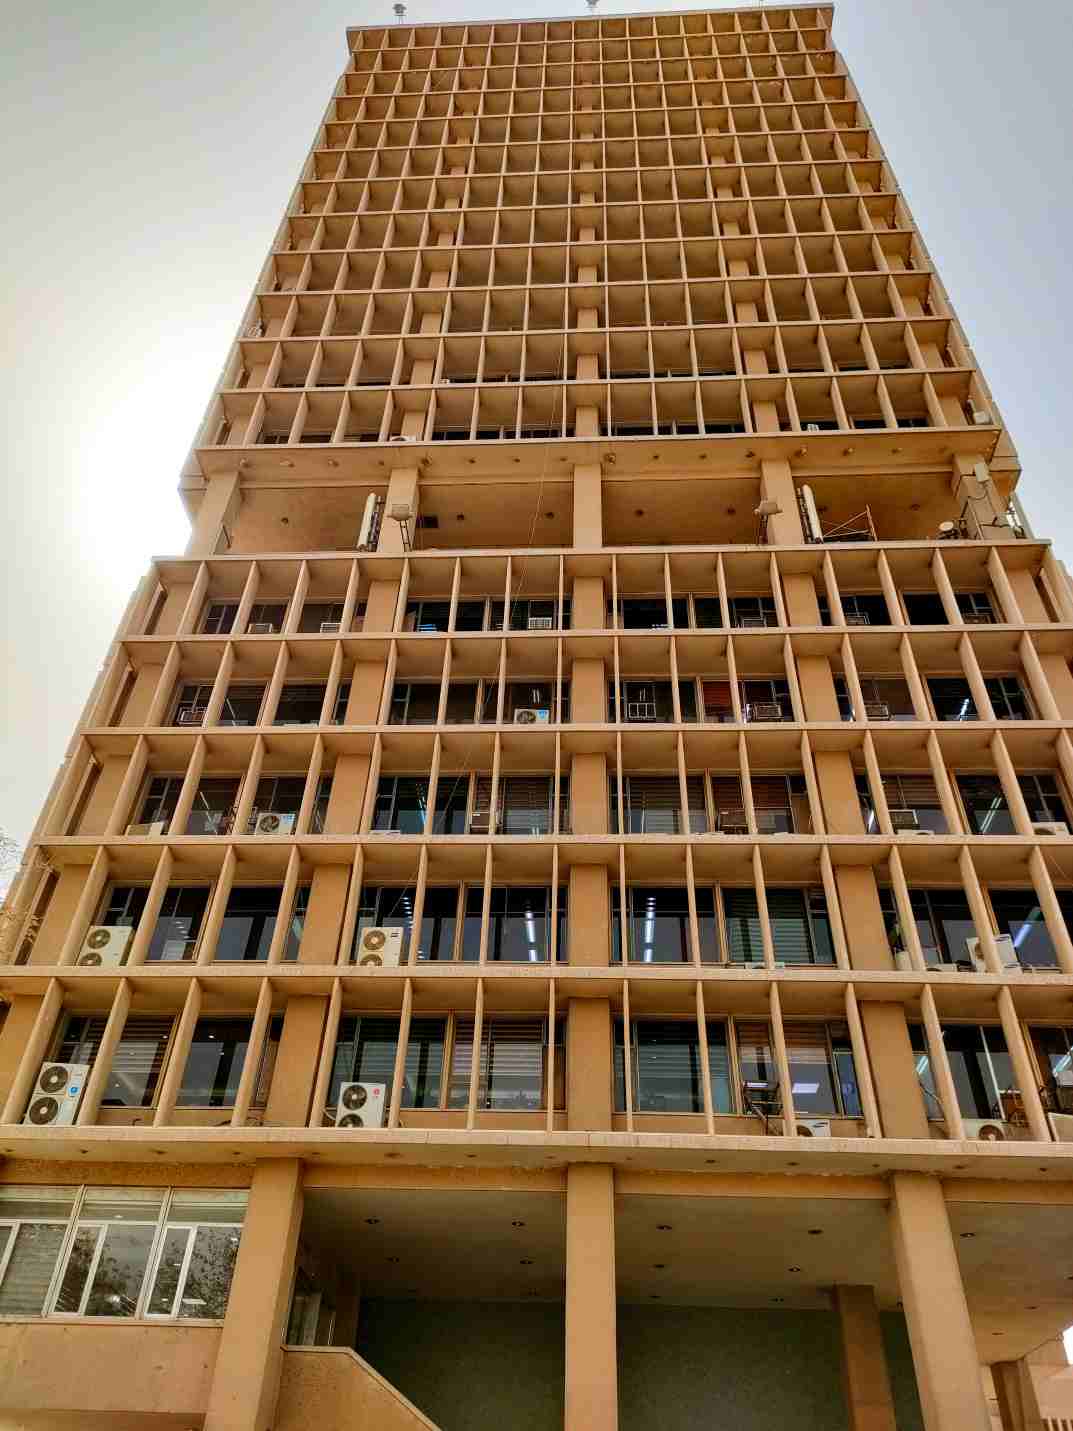 University of Baghdad Central Tower